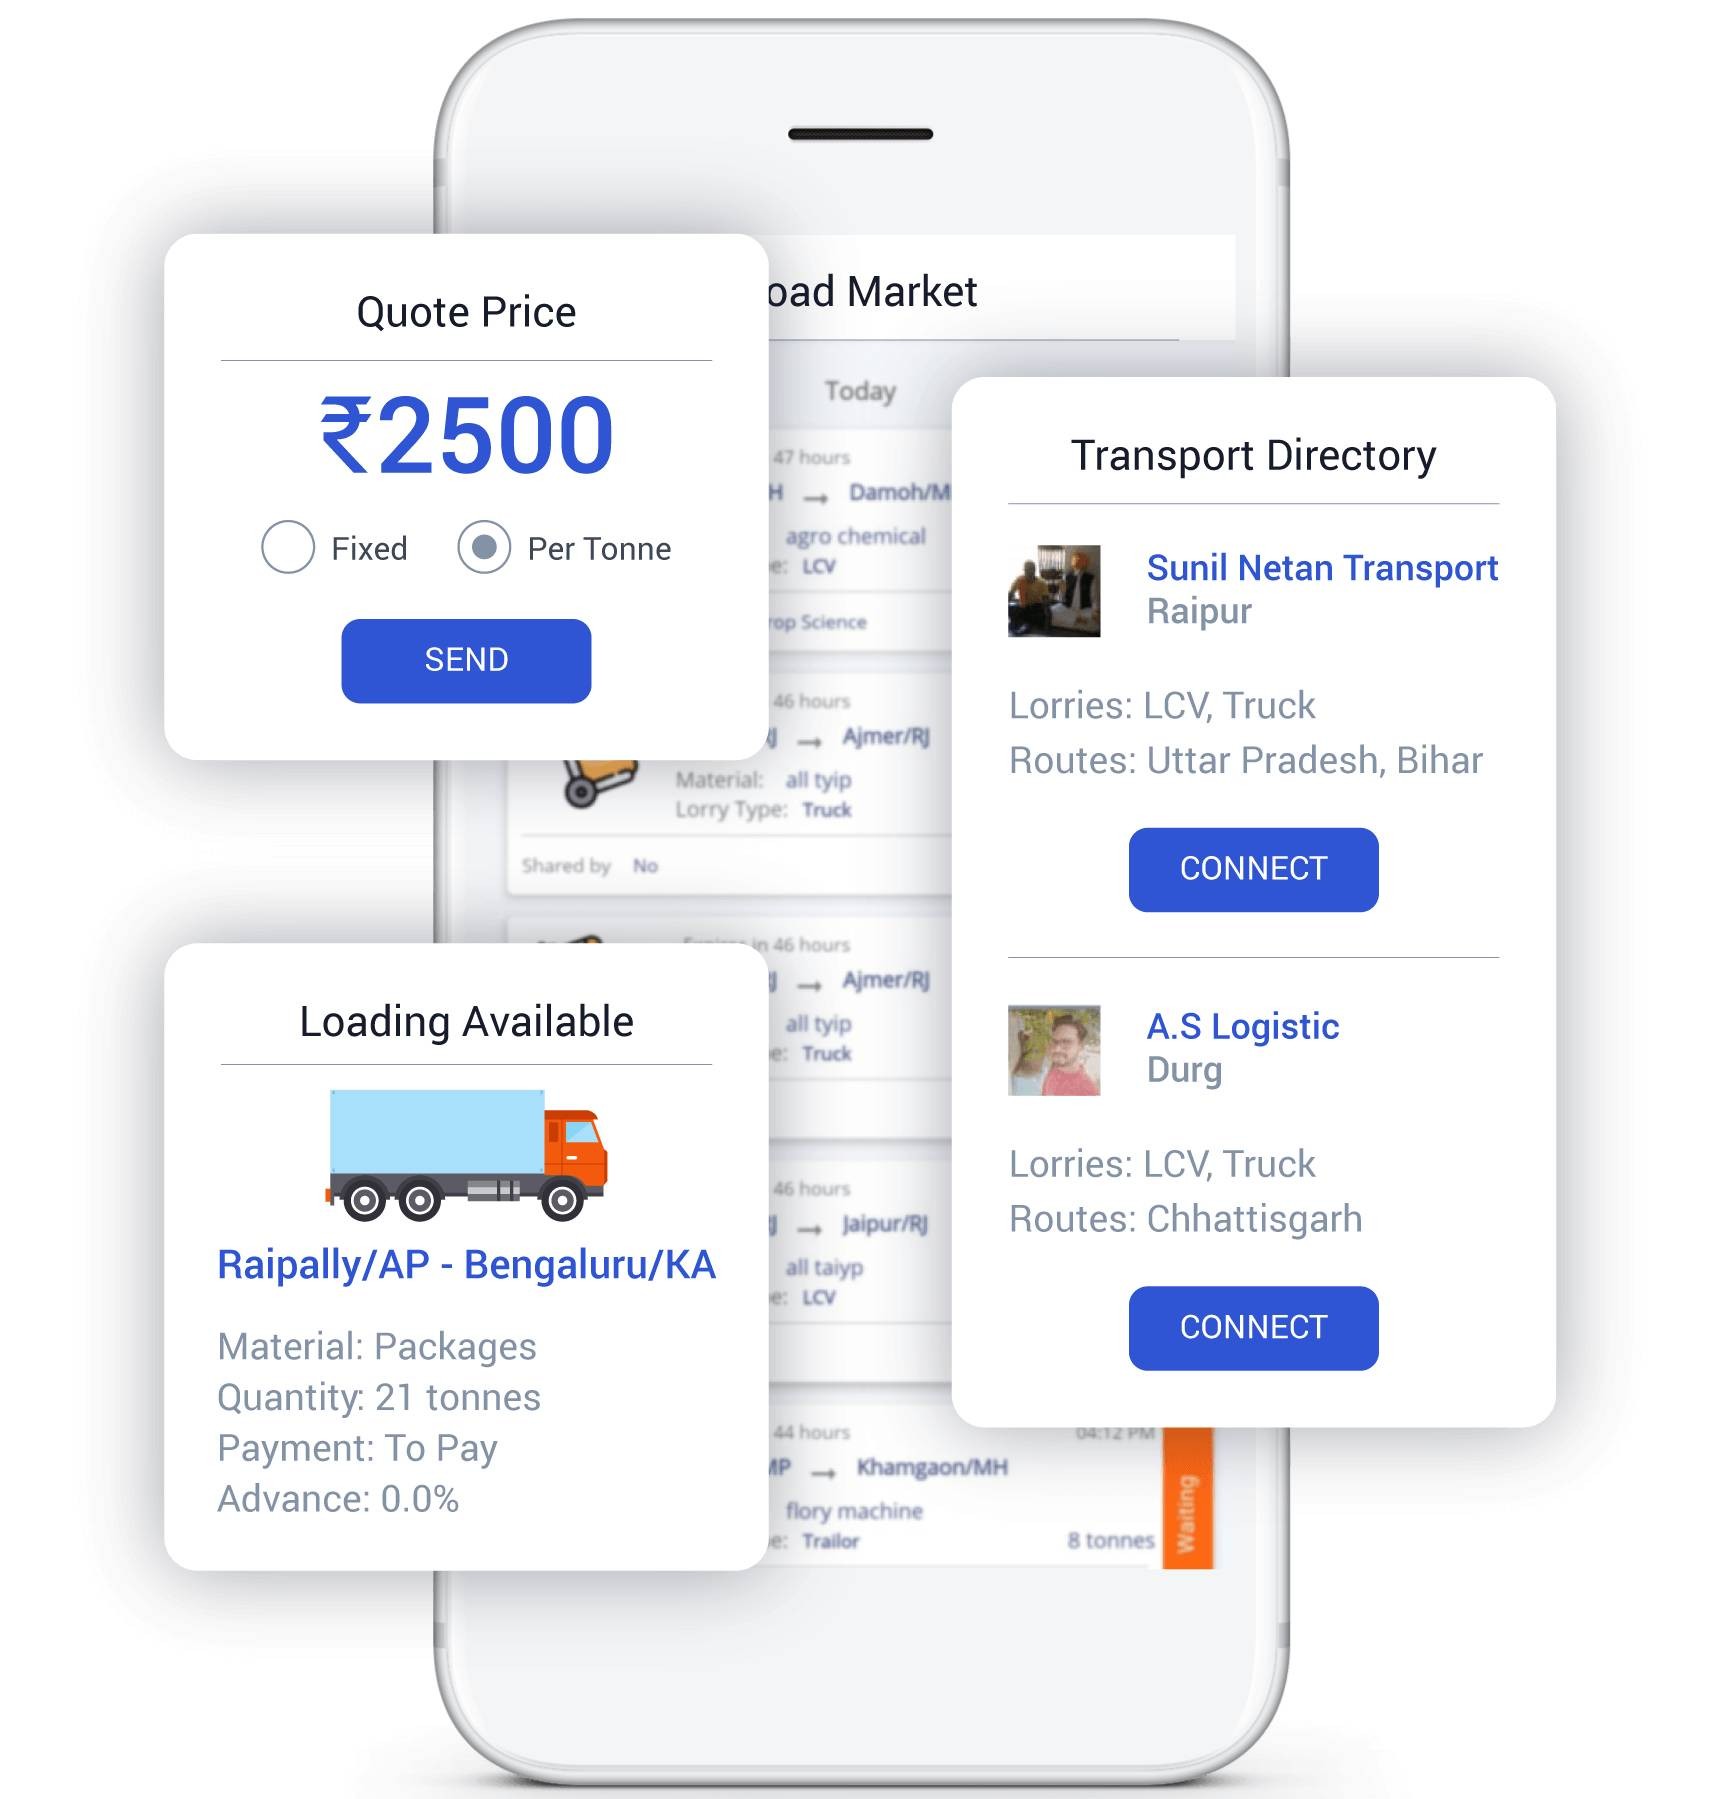 In June 2020 Vahak raised an undisclosed amount in seed funding led by venture capital fund Leo Capital.